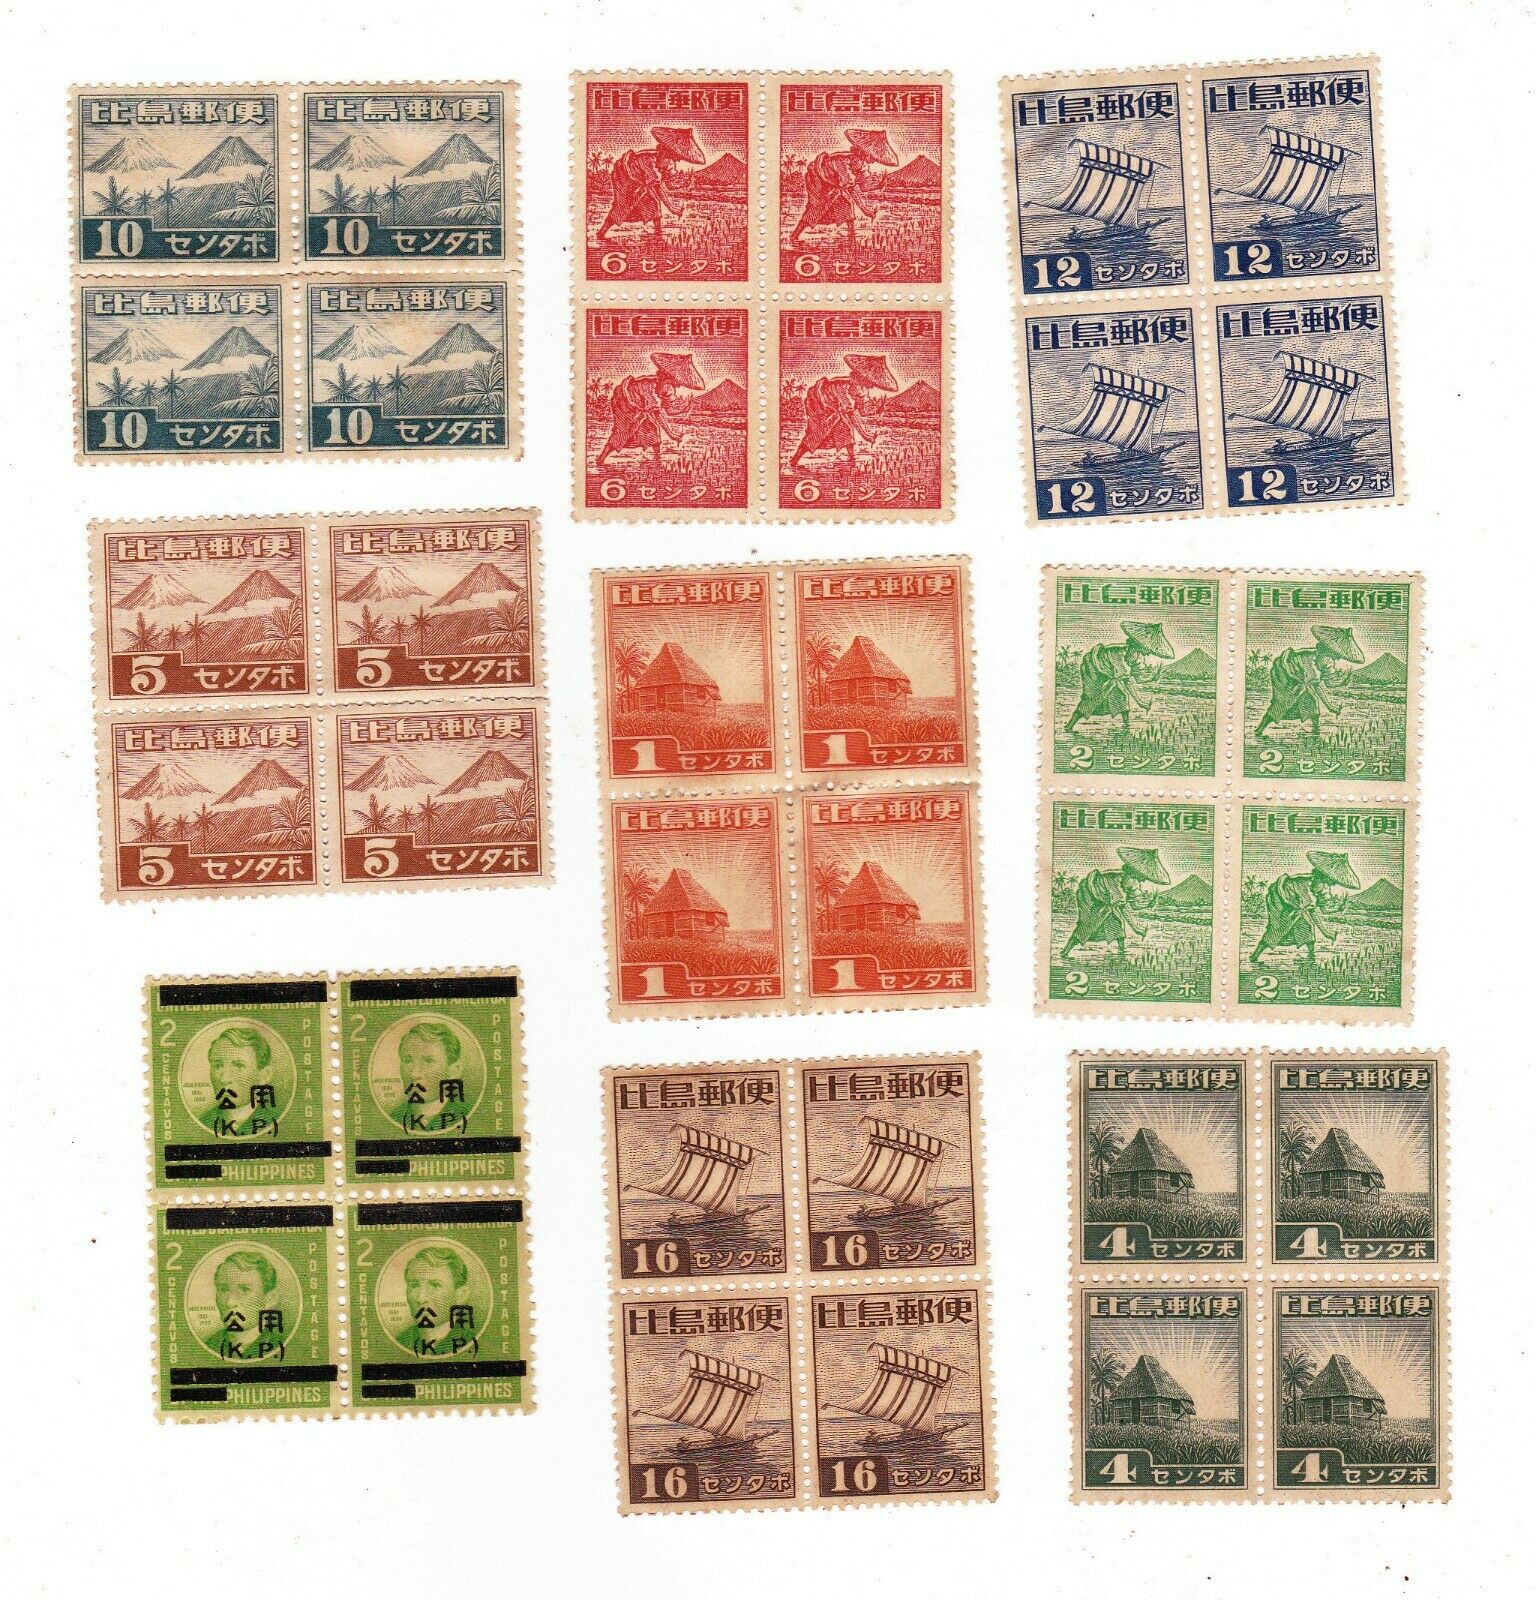 Old Philippines Stamps - I